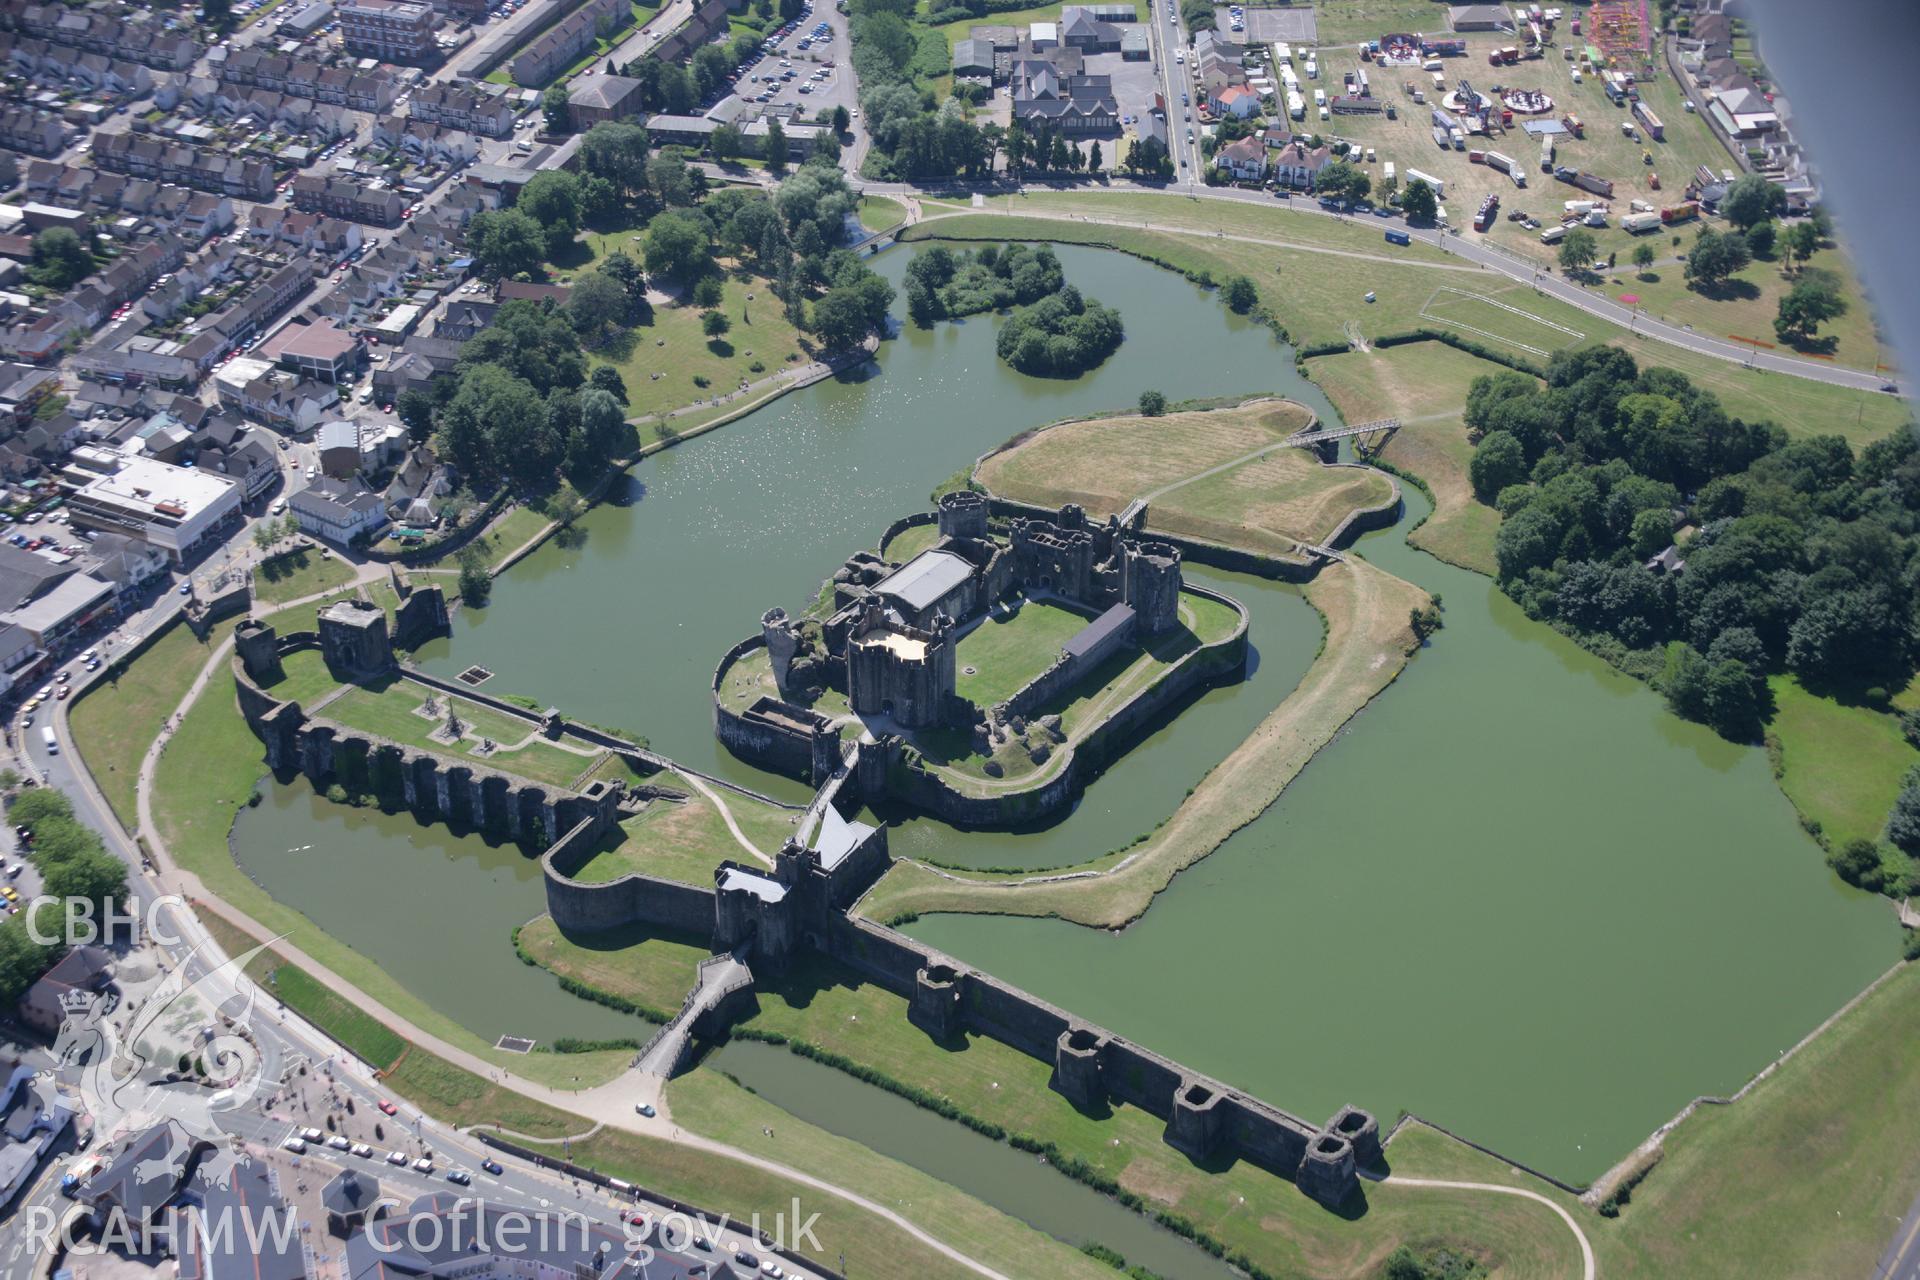 RCAHMW colour oblique aerial photograph of Caerphilly Castle. Taken on 24 July 2006 by Toby Driver.